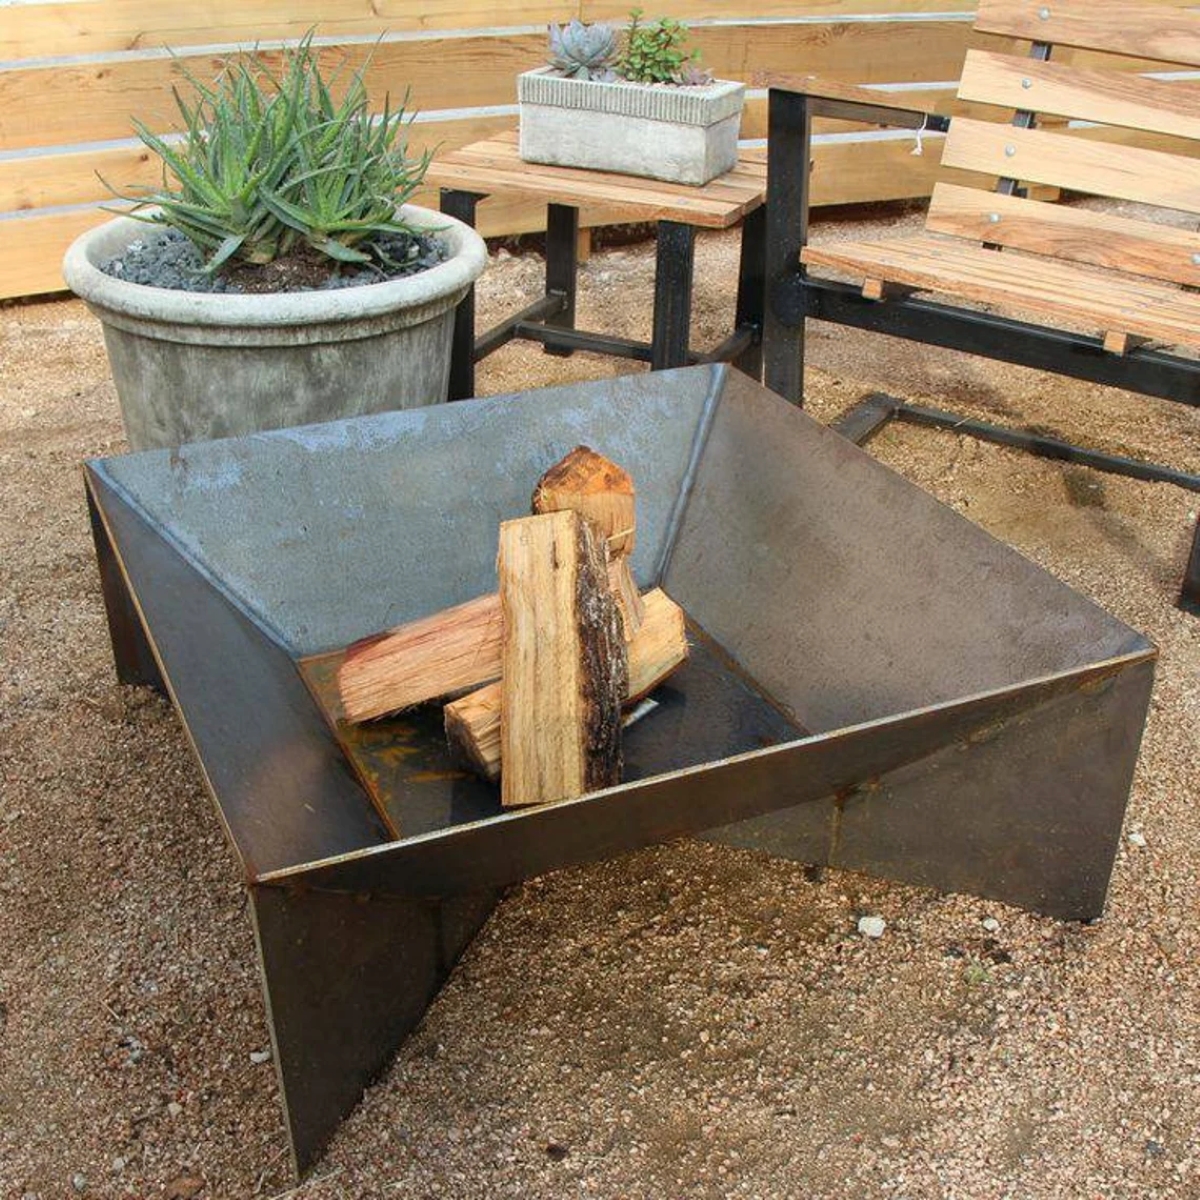 Metal fire pit with wood.